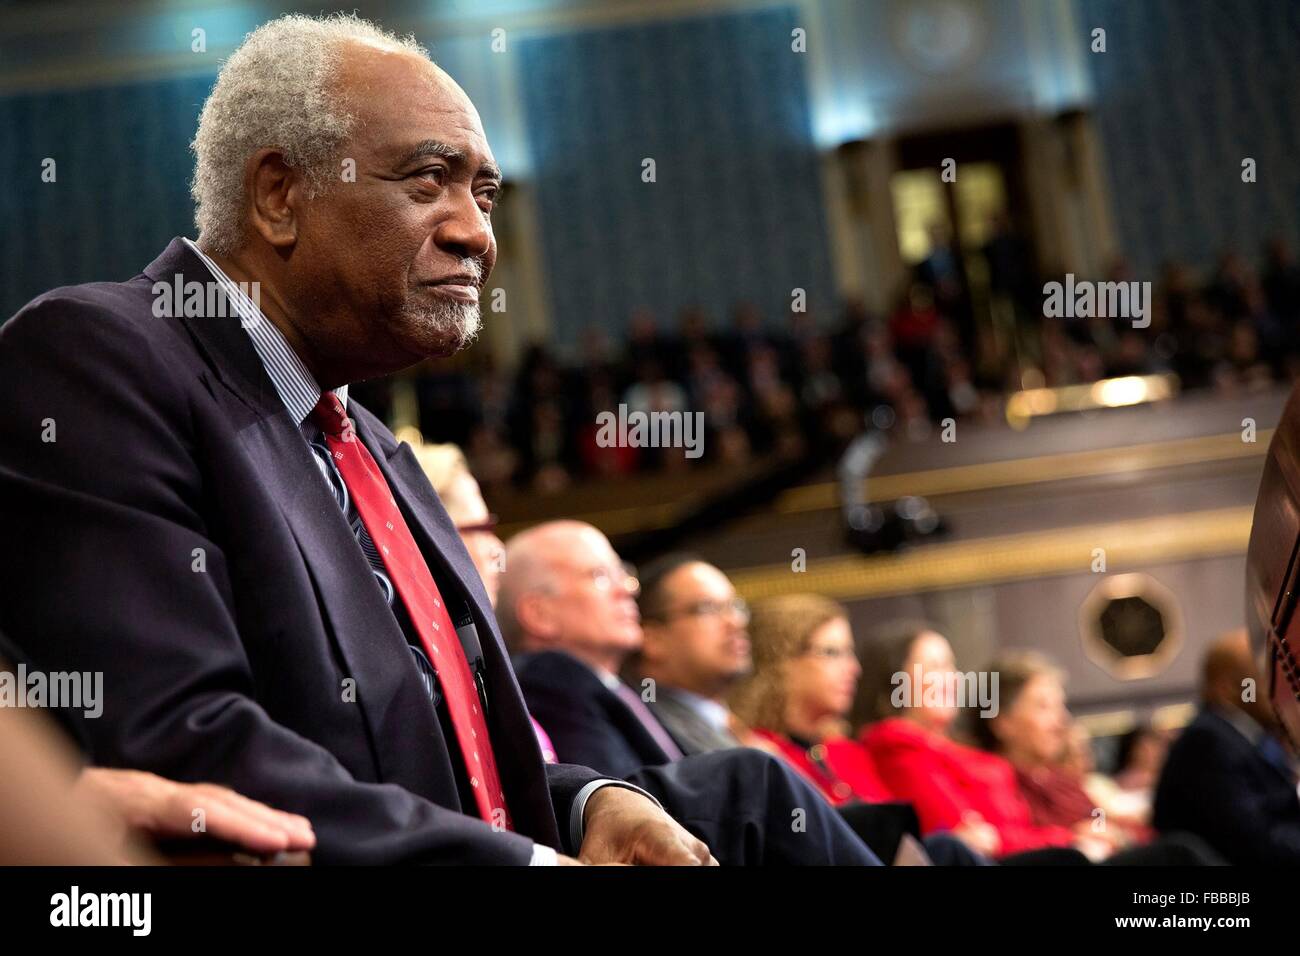 Washington DC, USA. 12th January, 2016. Rep. Danny Davis listens to U.S President Barack Obama deliver his final State of the Union address to a joint session of Congress on Capitol Hill January 12, 2016 in Washington, DC. Stock Photo